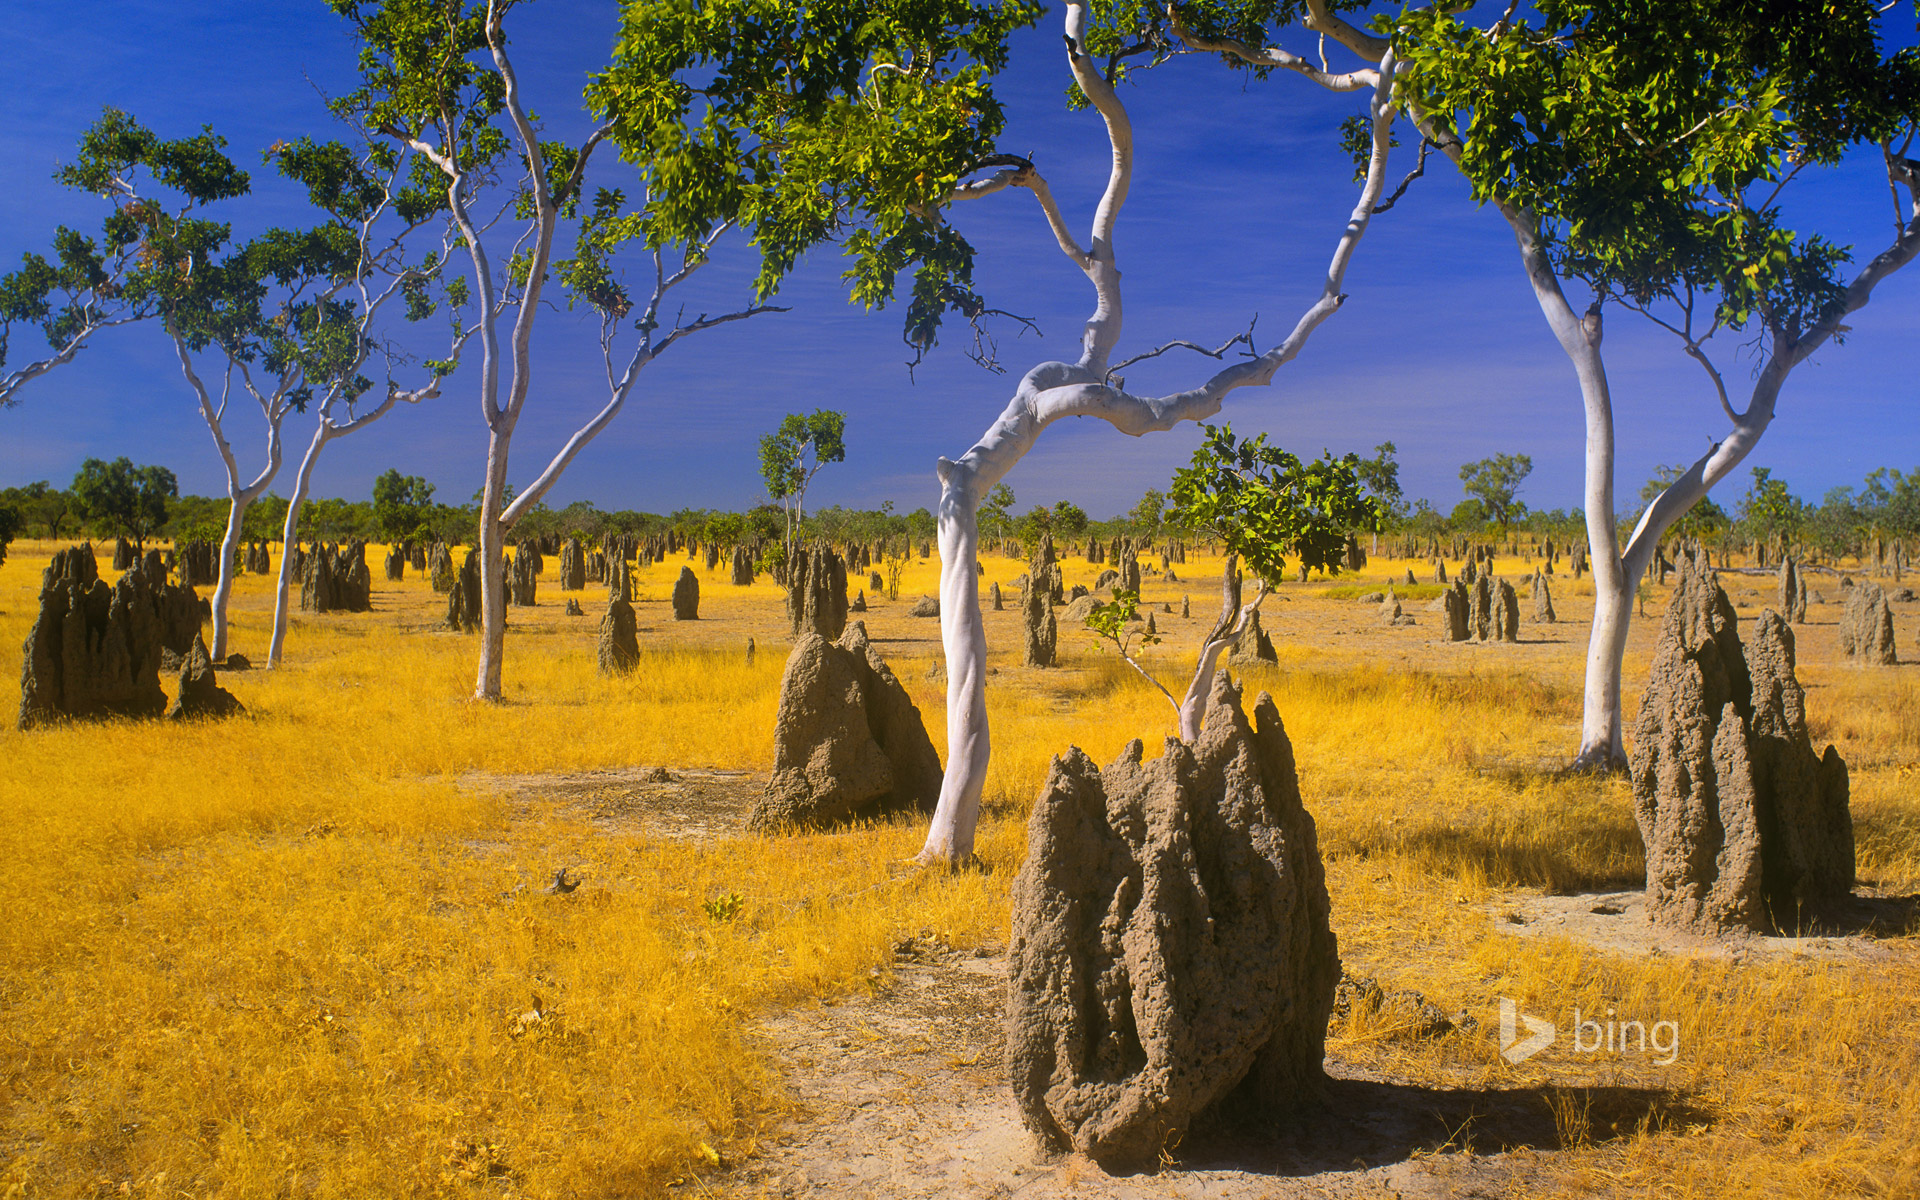 Termite mounds and snappy gums in savannah grassland